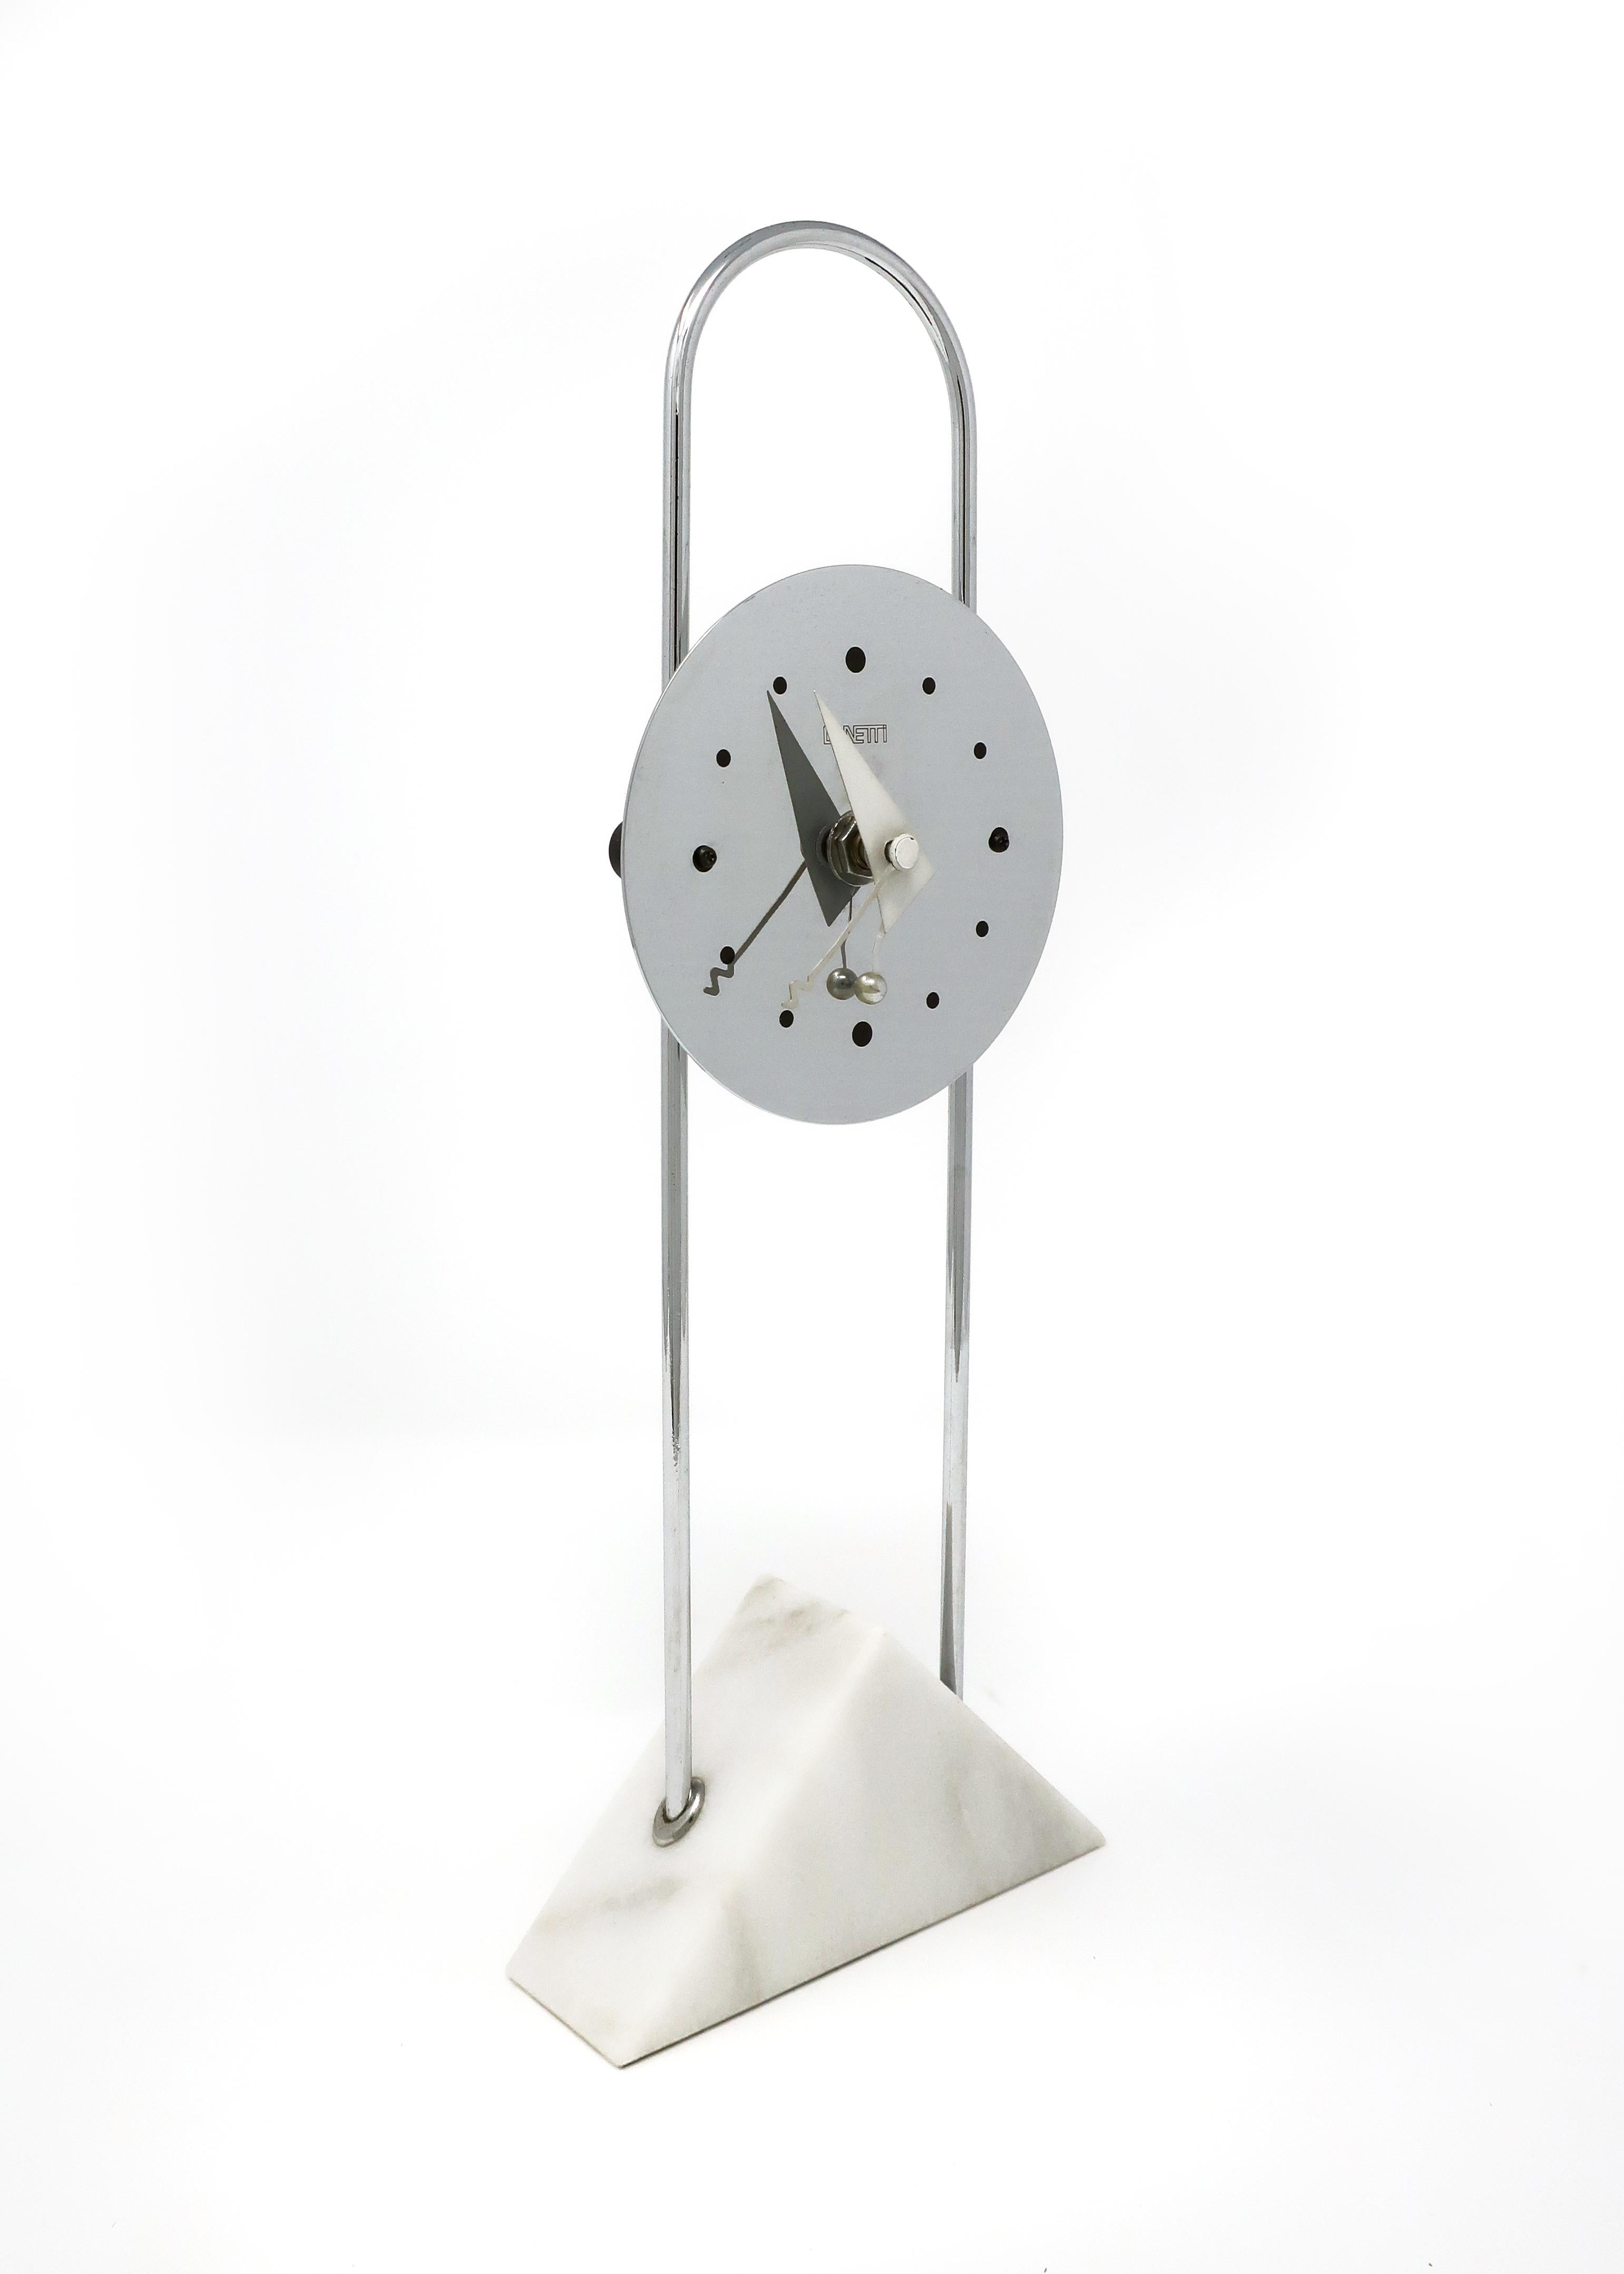 A stunning Postmodern clock by Canetti with a chrome face on an arching chrome stem set in a white marble base. Dated 1989, this clock screams its Memphis inspiration from the use of primary shapes to the quickly shapes of the clock’s hands. In